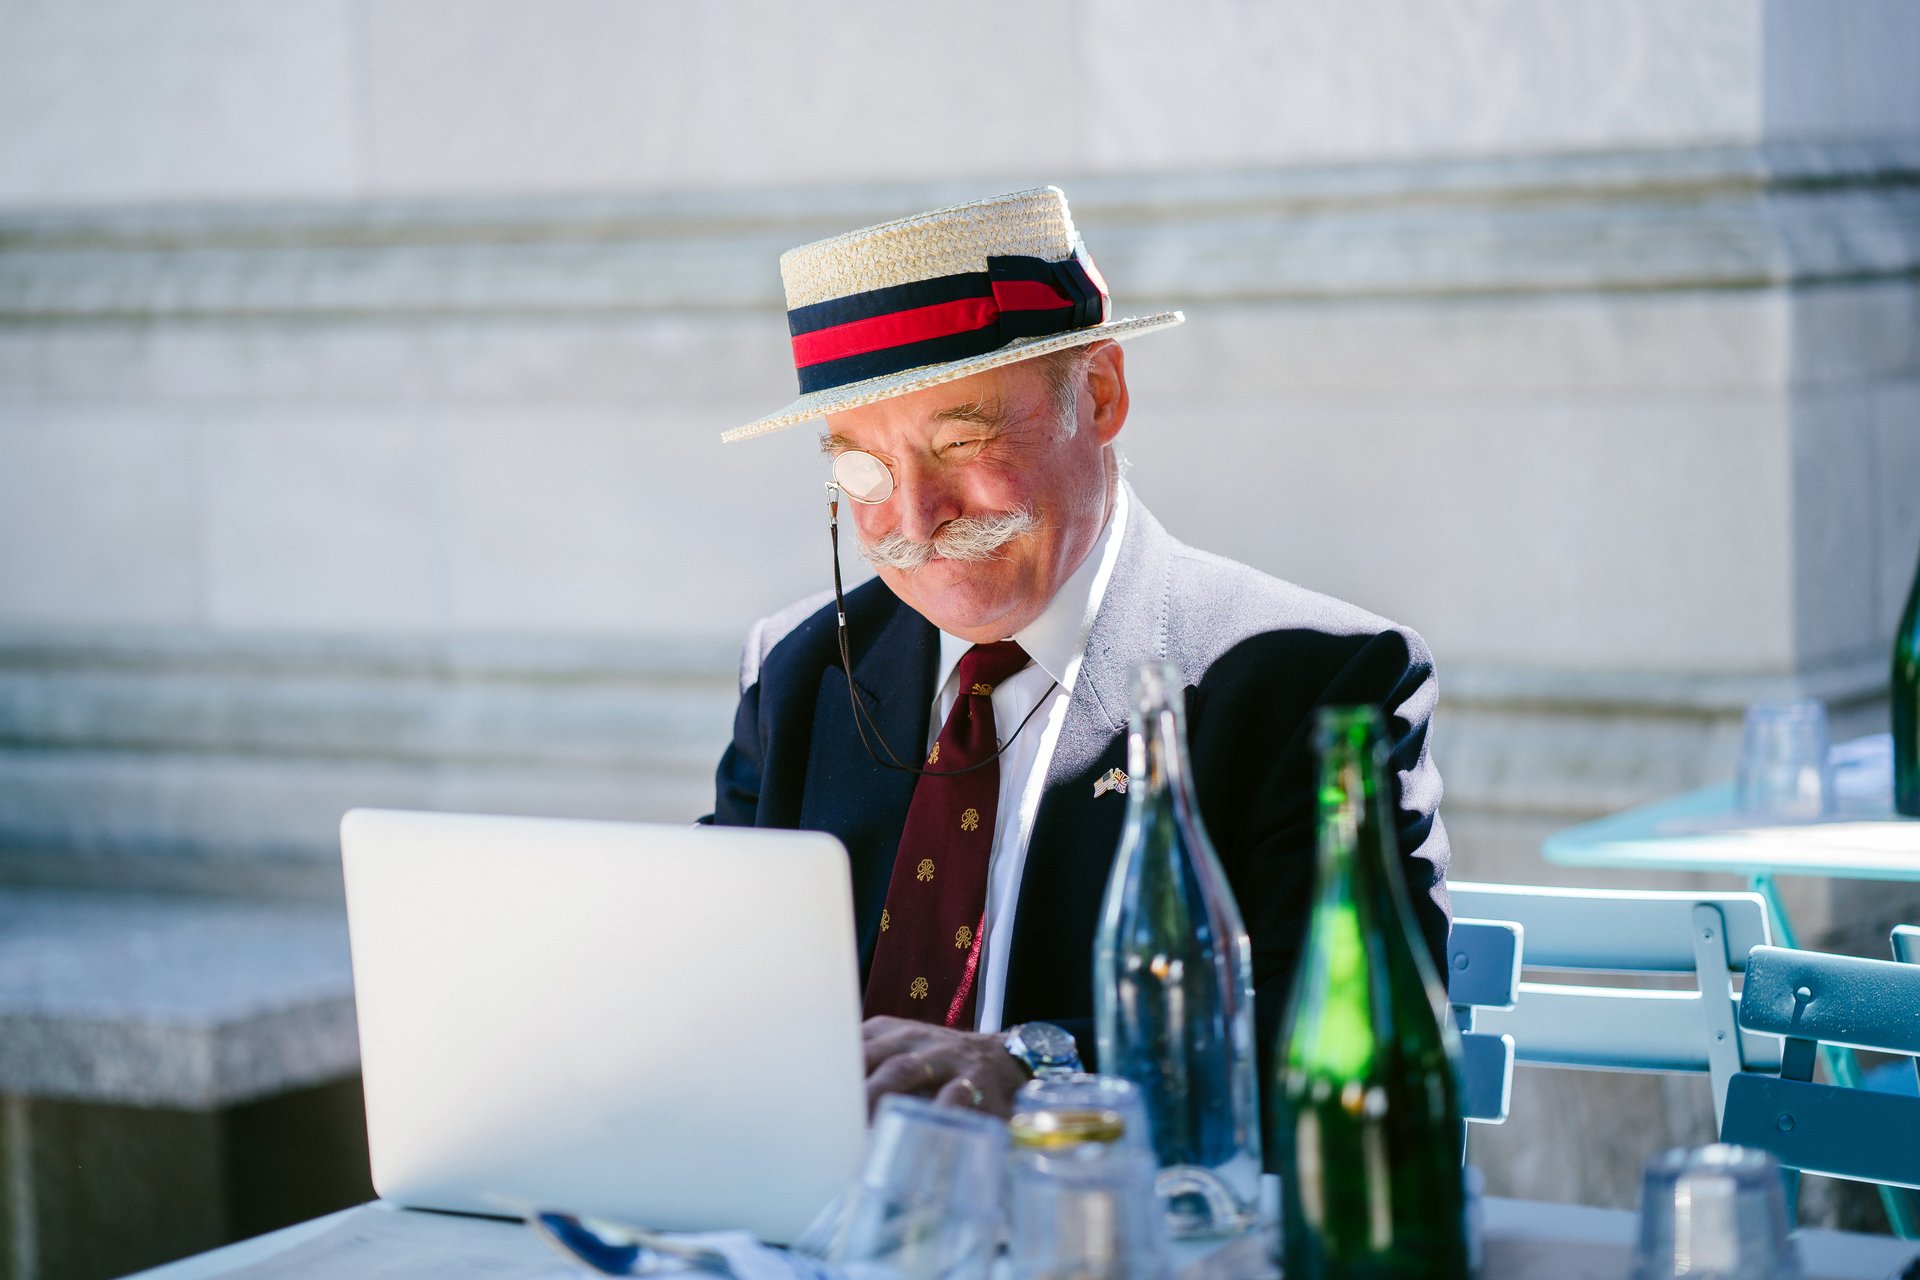 man using laptop at outdoor cafe wearing a hat and a monocle